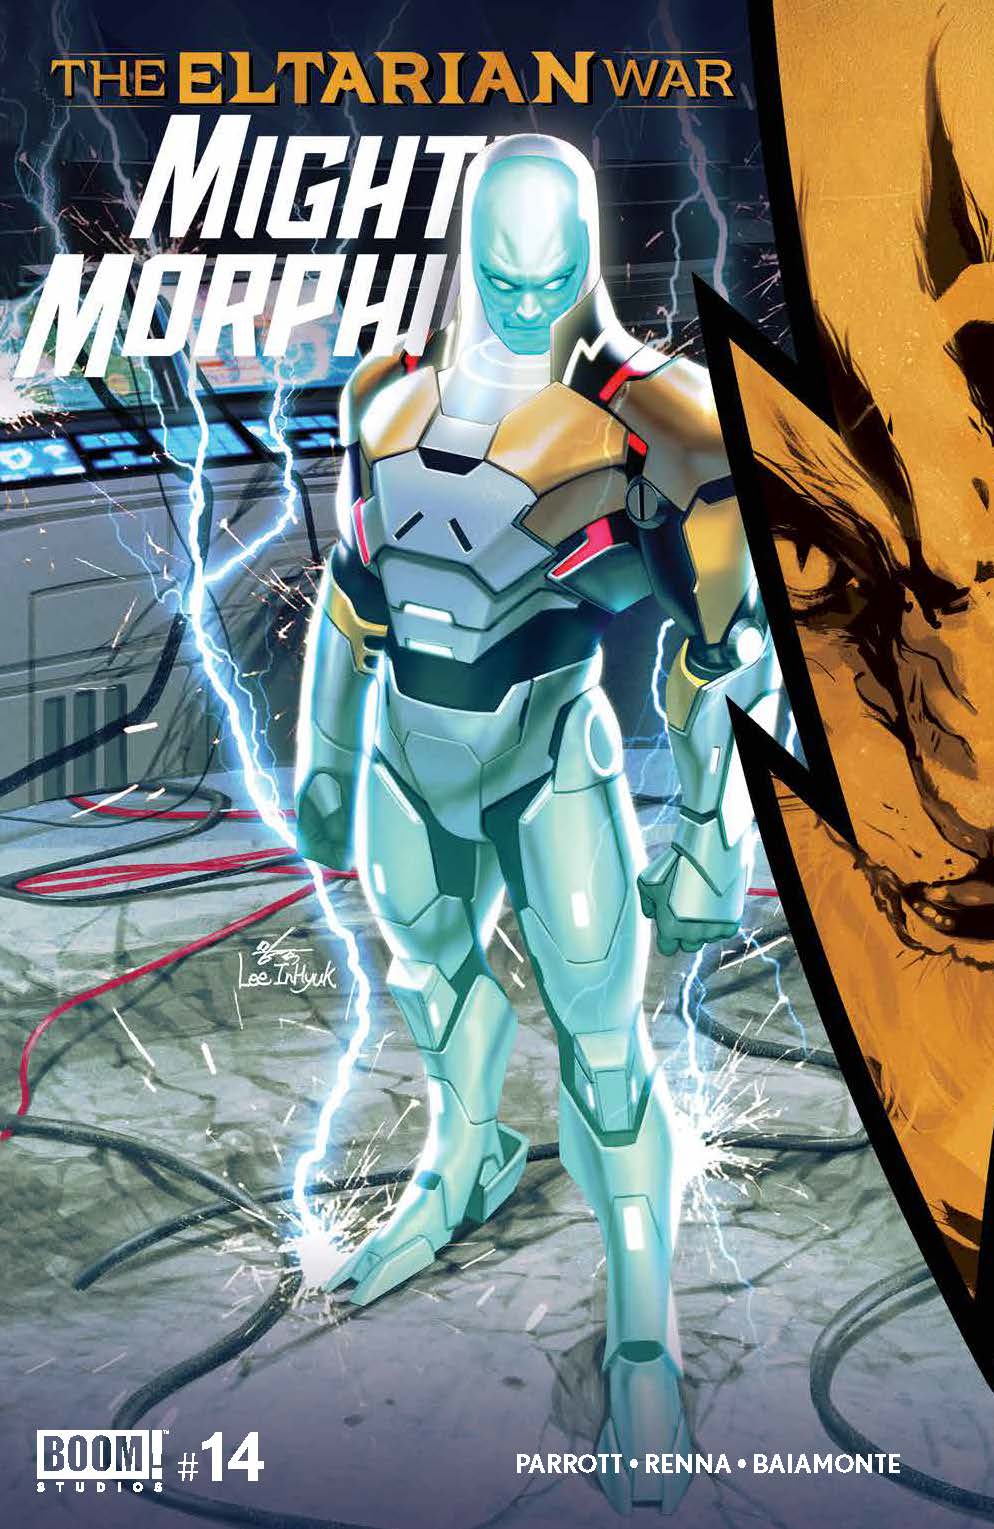 Mighty Morphin #14 Cover A Lee